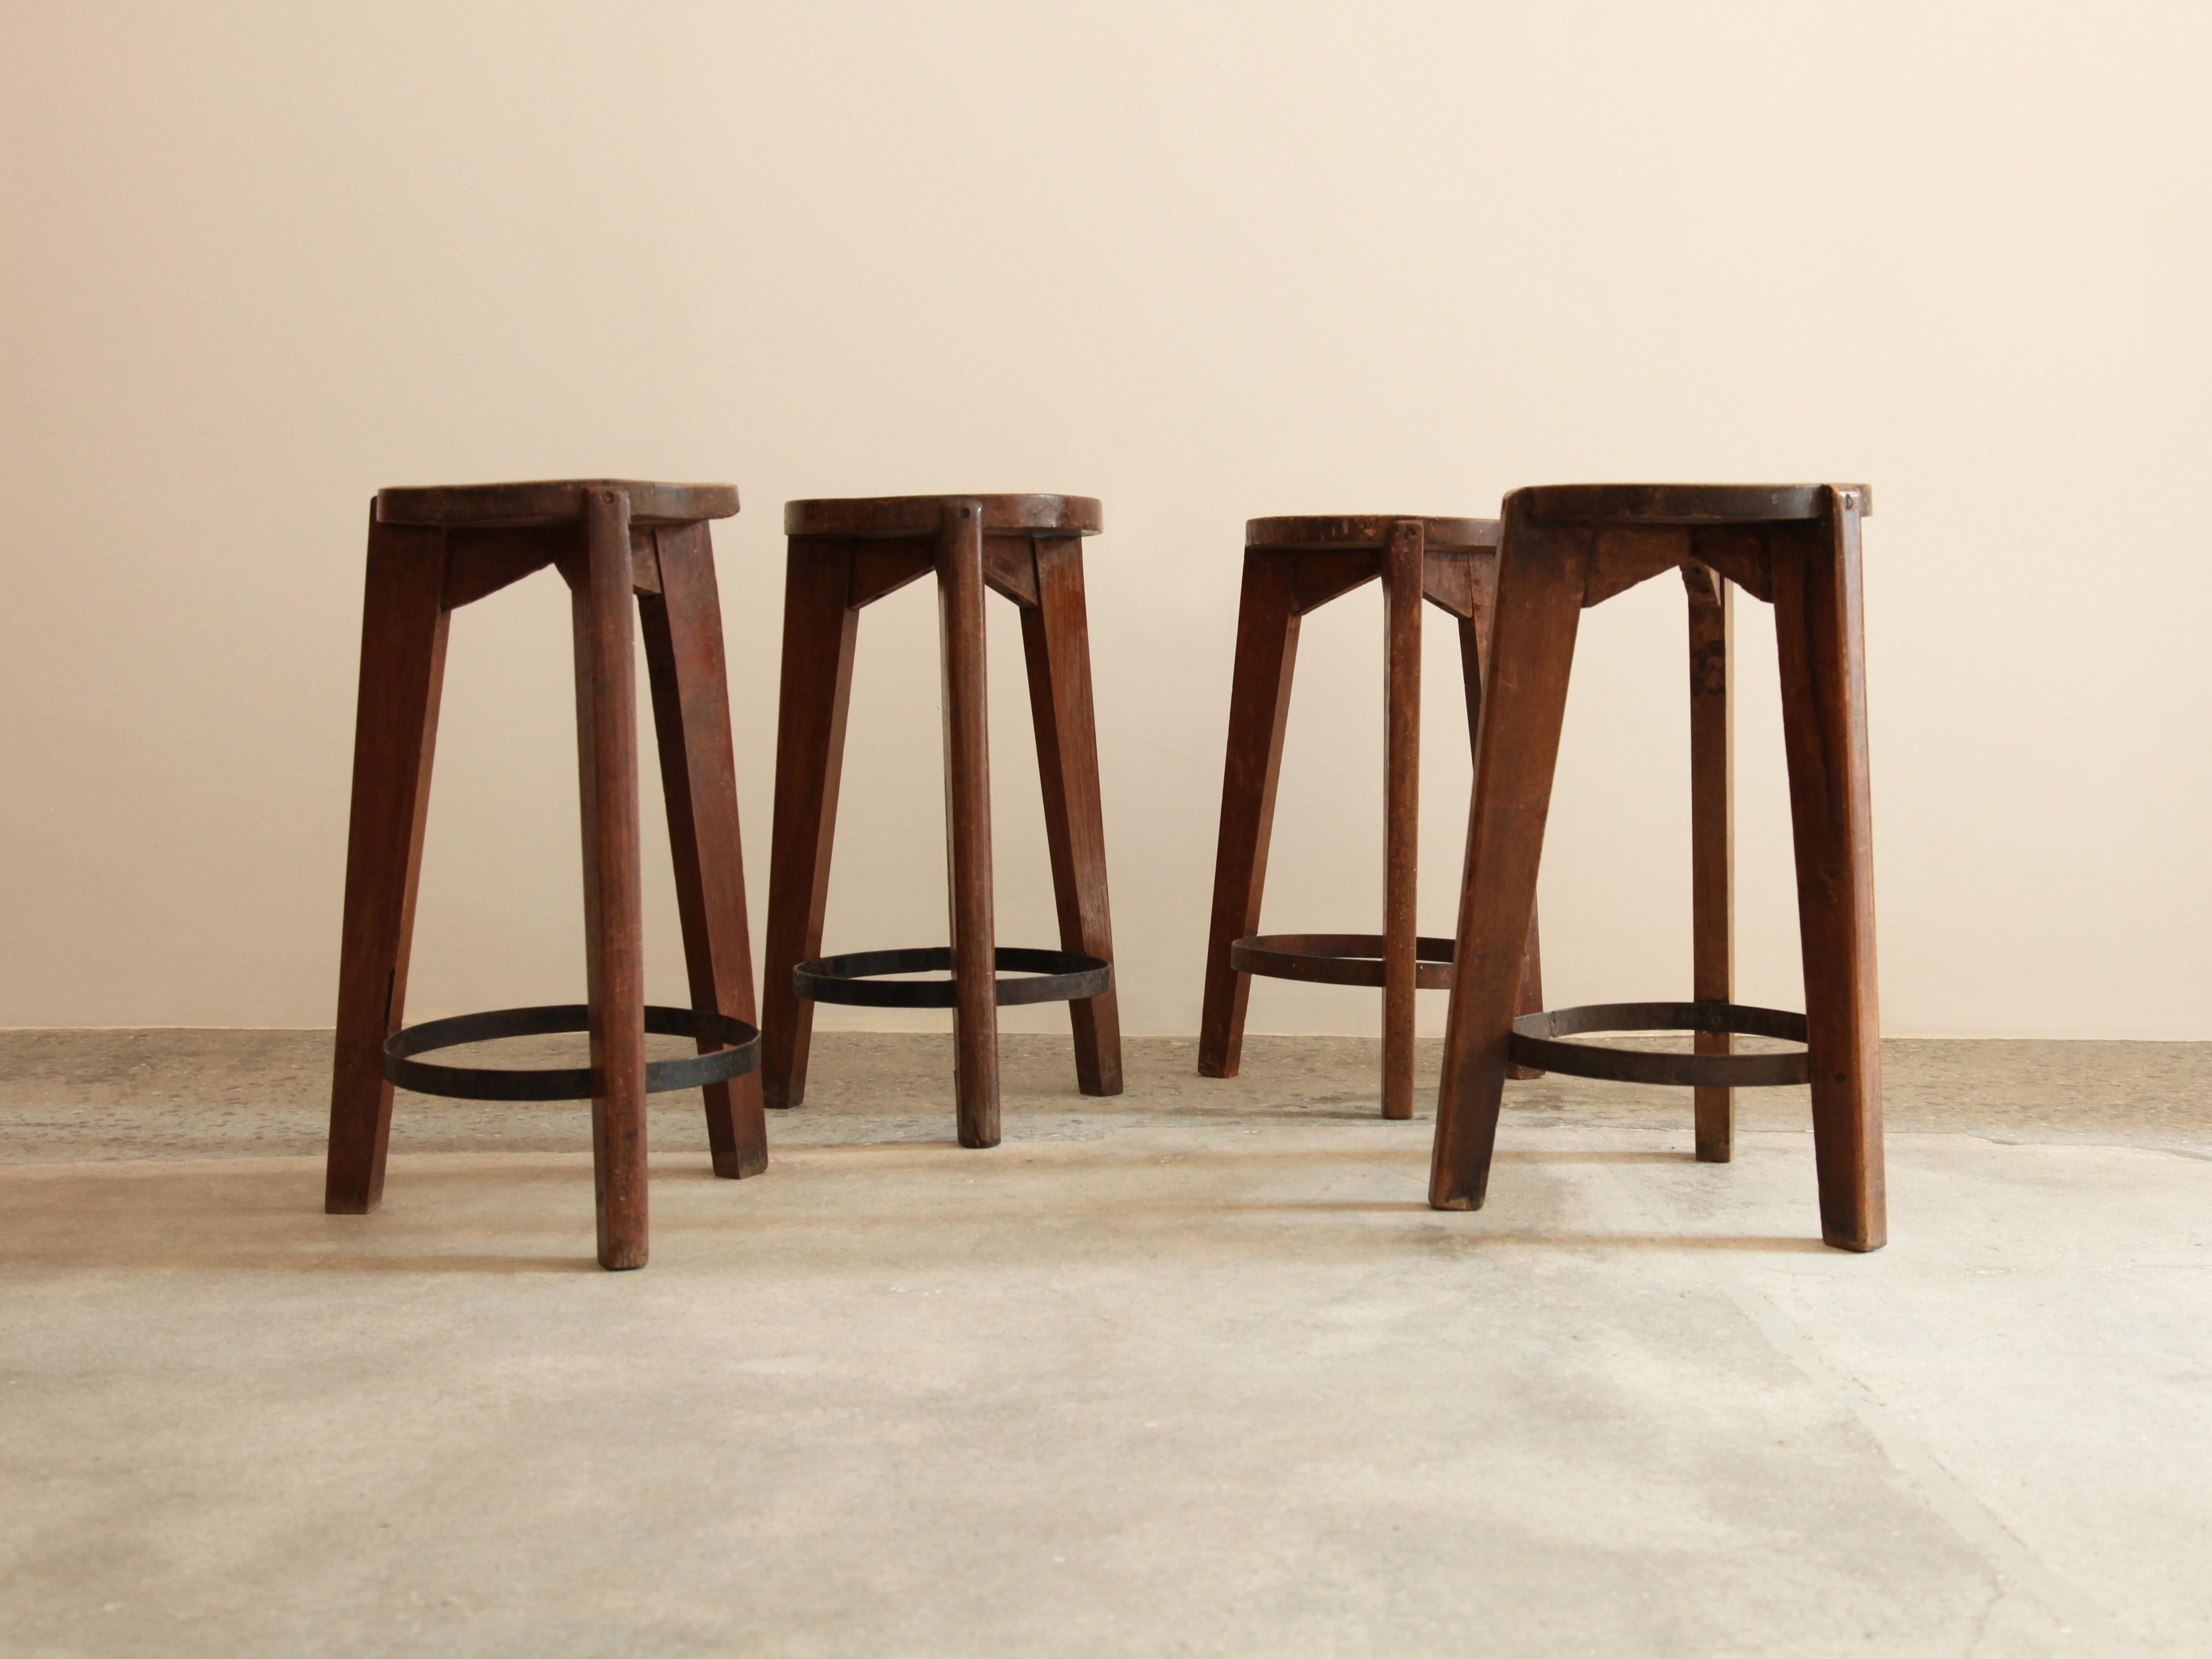 Set of four tall counter stools from Punjab University, Chandigarh, circa 1965. Incredible original patina. Sold in pairs.

Literature: Le Corbusier Pierre Jeanneret: The Indian Adventure, Design-Art-Architecture, Touchaleaume and Moreau, pg. 560.